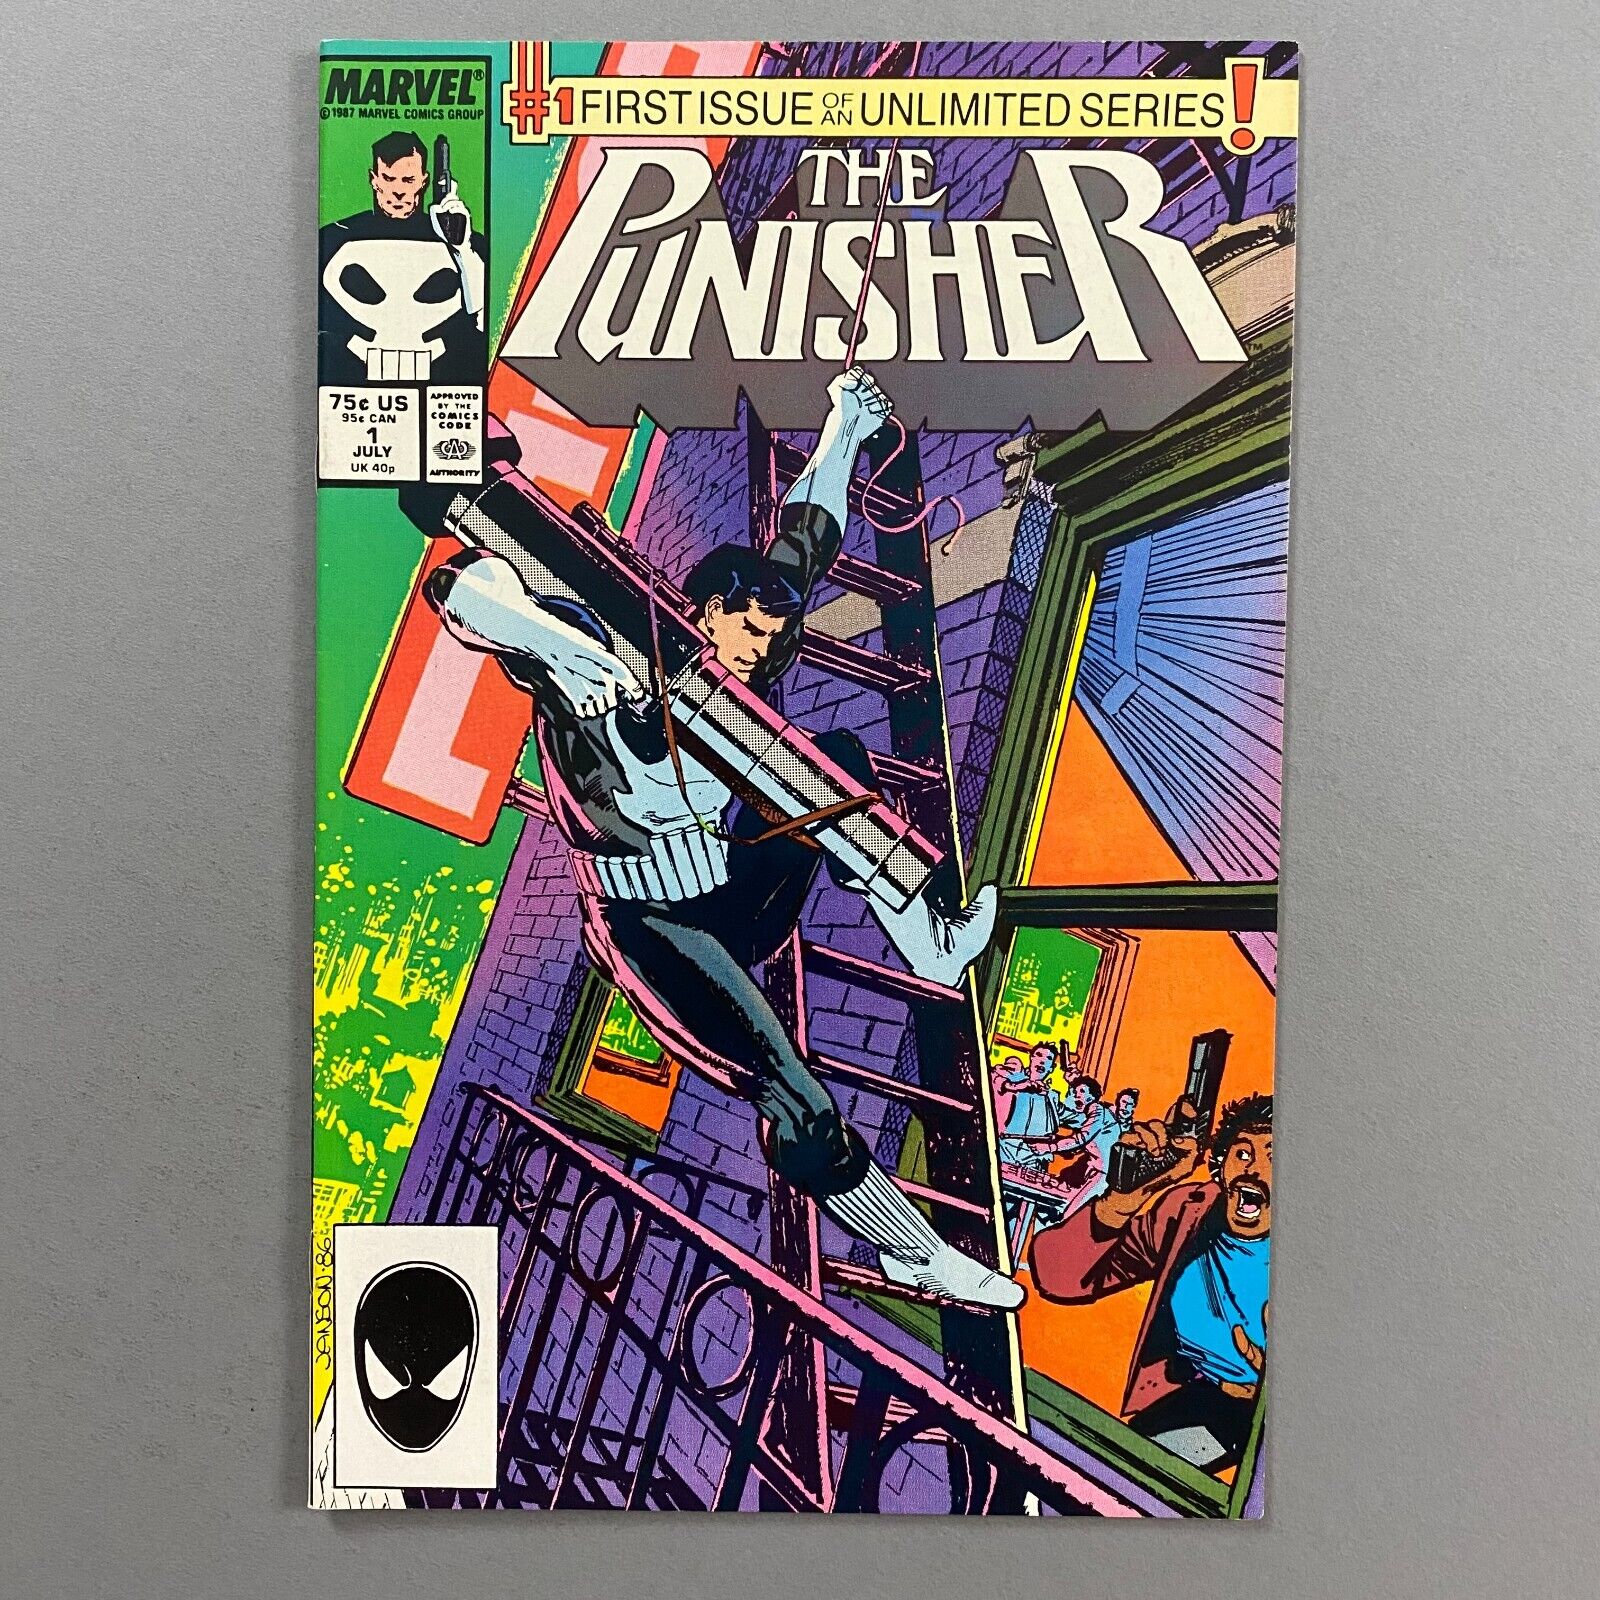 PUNISHER 1 1ST ONGOING SERIES (1987, MARVEL COMICS)